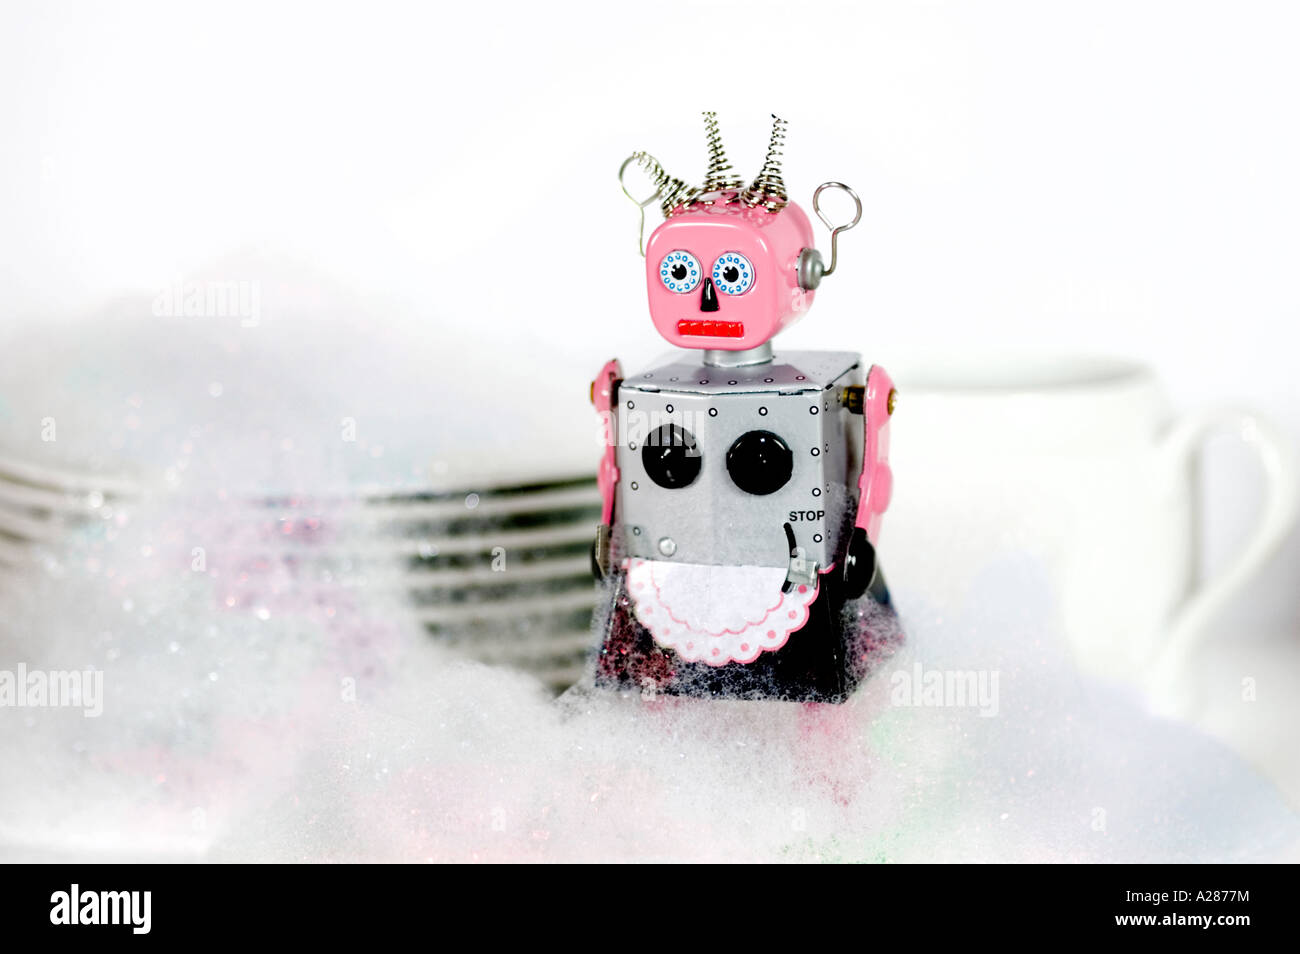 Female tin toy robot standing in front of dishes and covered in soap suds or washing up liquid bubbles Stock Photo